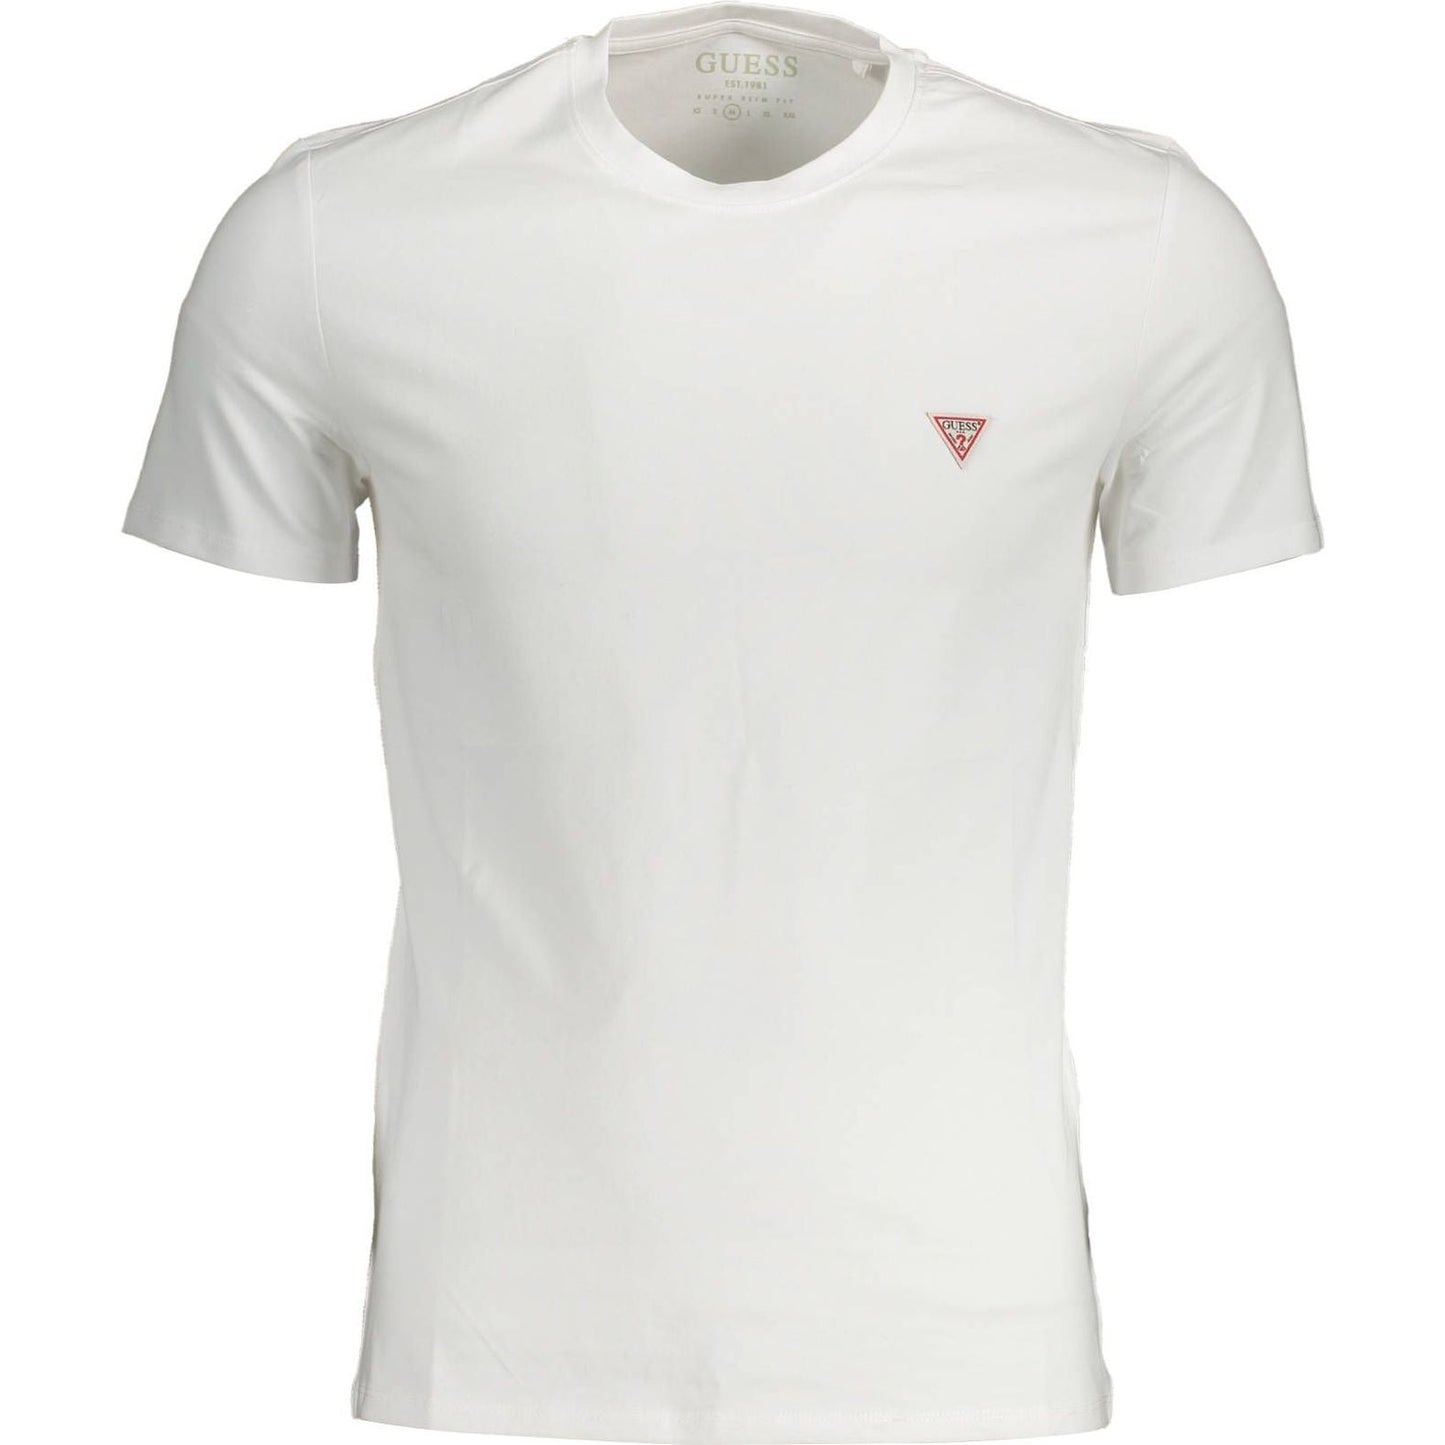 Guess Jeans Sleek White Round Neck Slim Fit Tee sleek-white-round-neck-slim-fit-tee